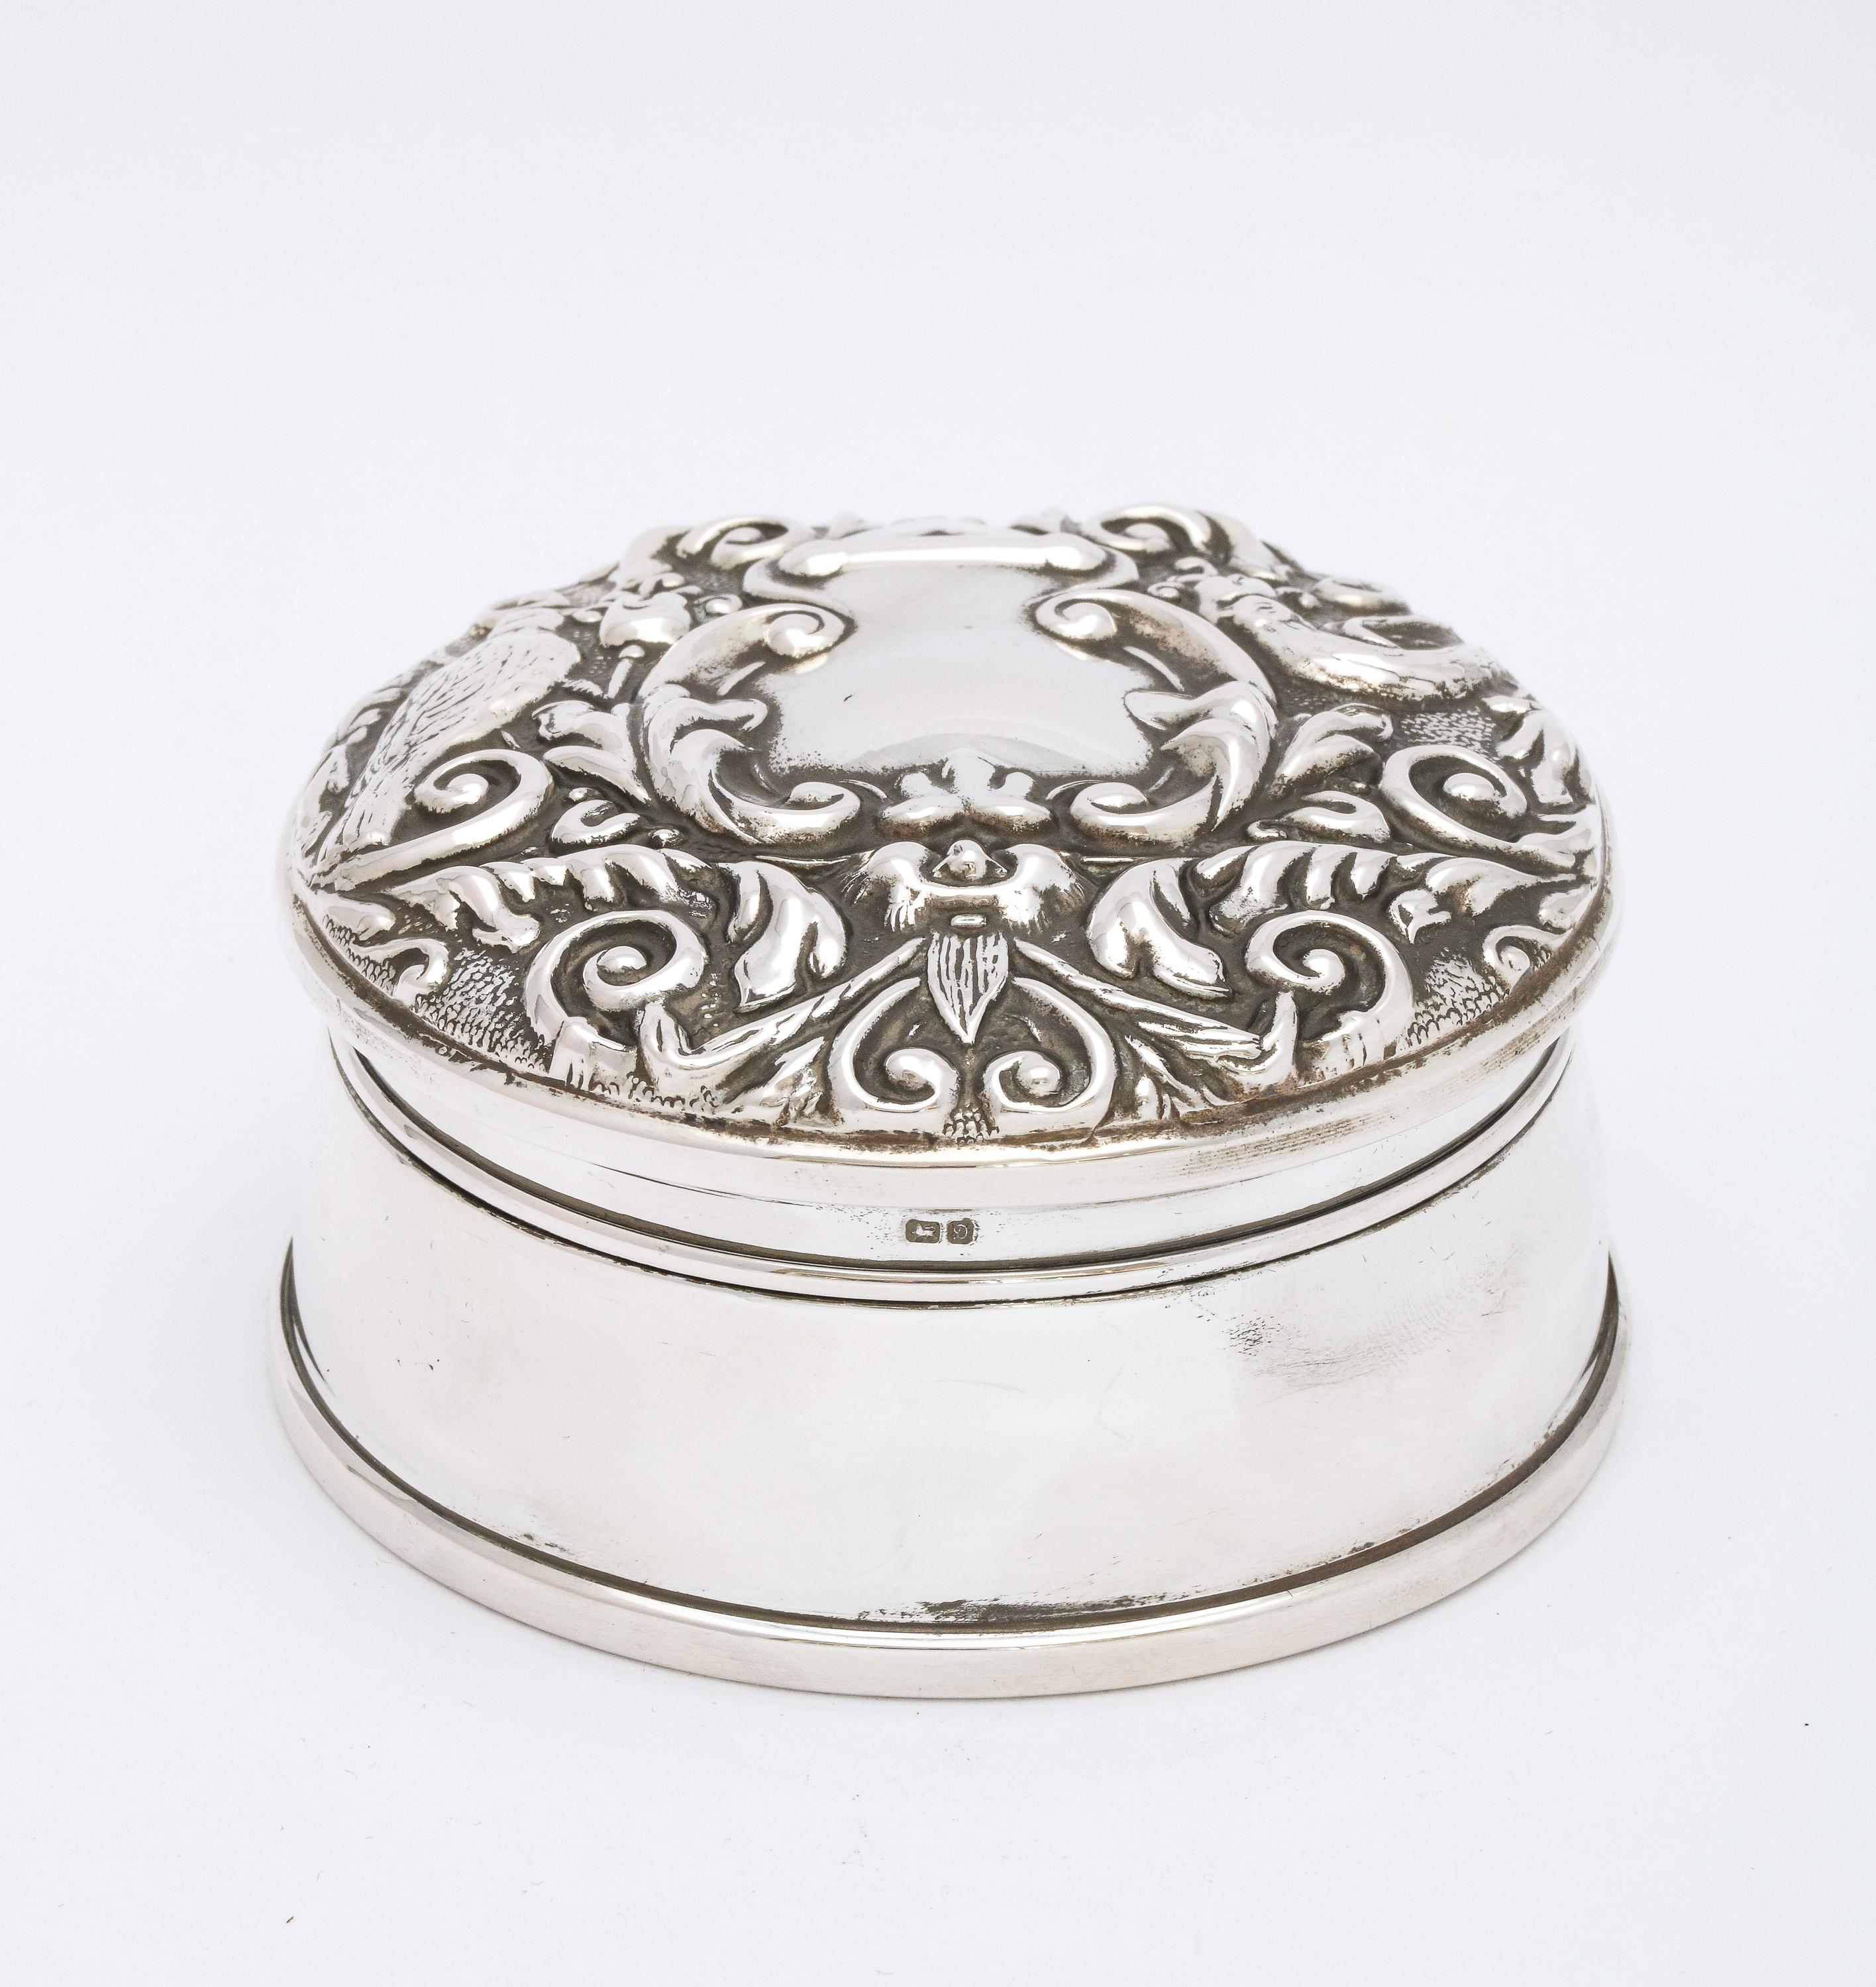 Victorian-style, sterling silver trinkets box with hinged lid, Birmingham, England, year-hallmarked for 1978, Broadway and Company-makers. Lined with navy blue velvet. Underside is covered in leather. Designed with birds, etc. Measures 3 1/2 inches